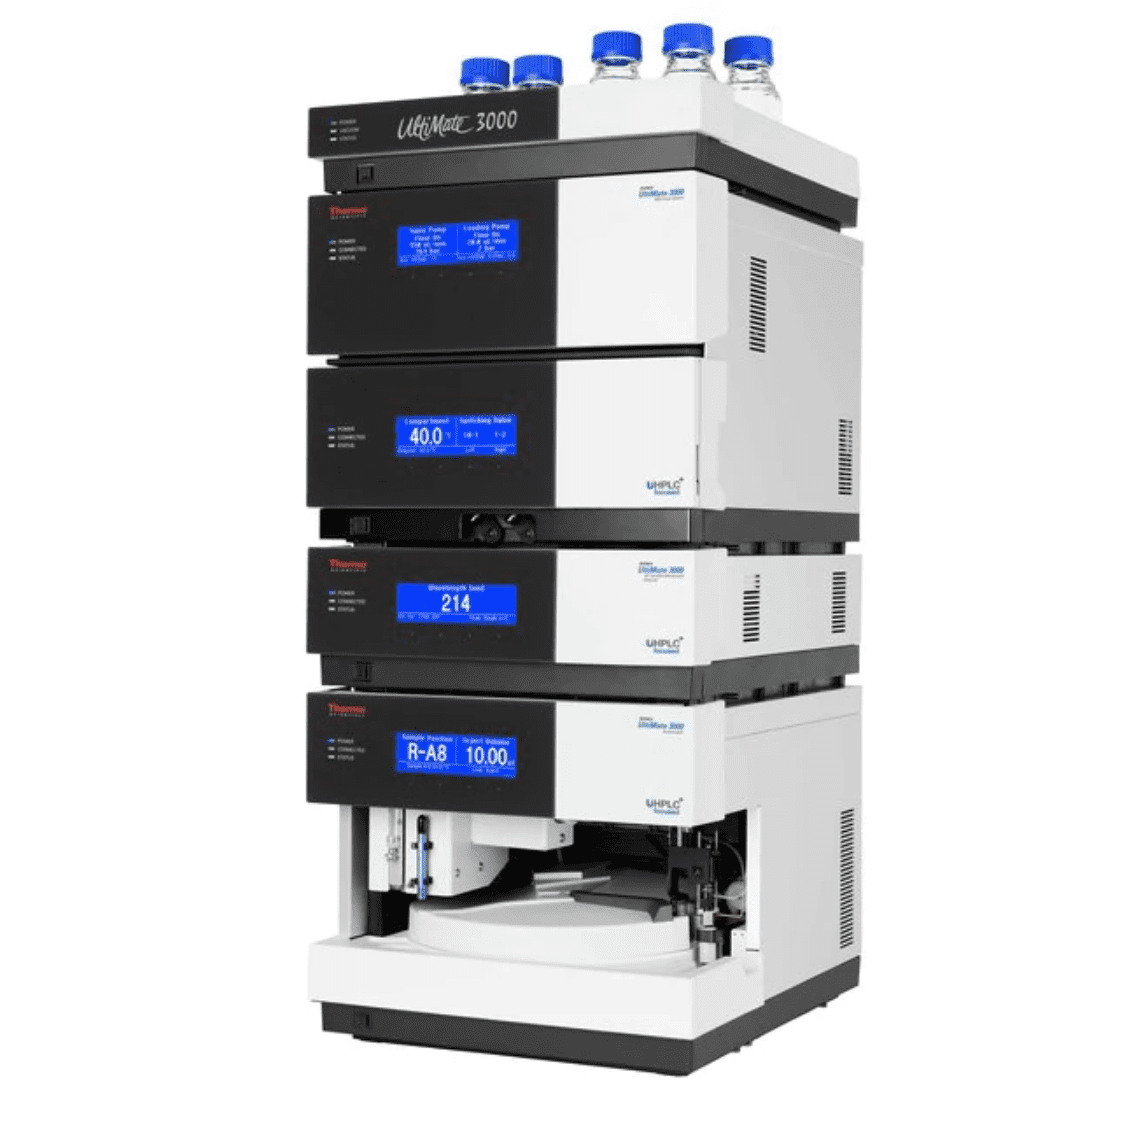 Thermo Fisher UltiMate 3000 UHPLC 